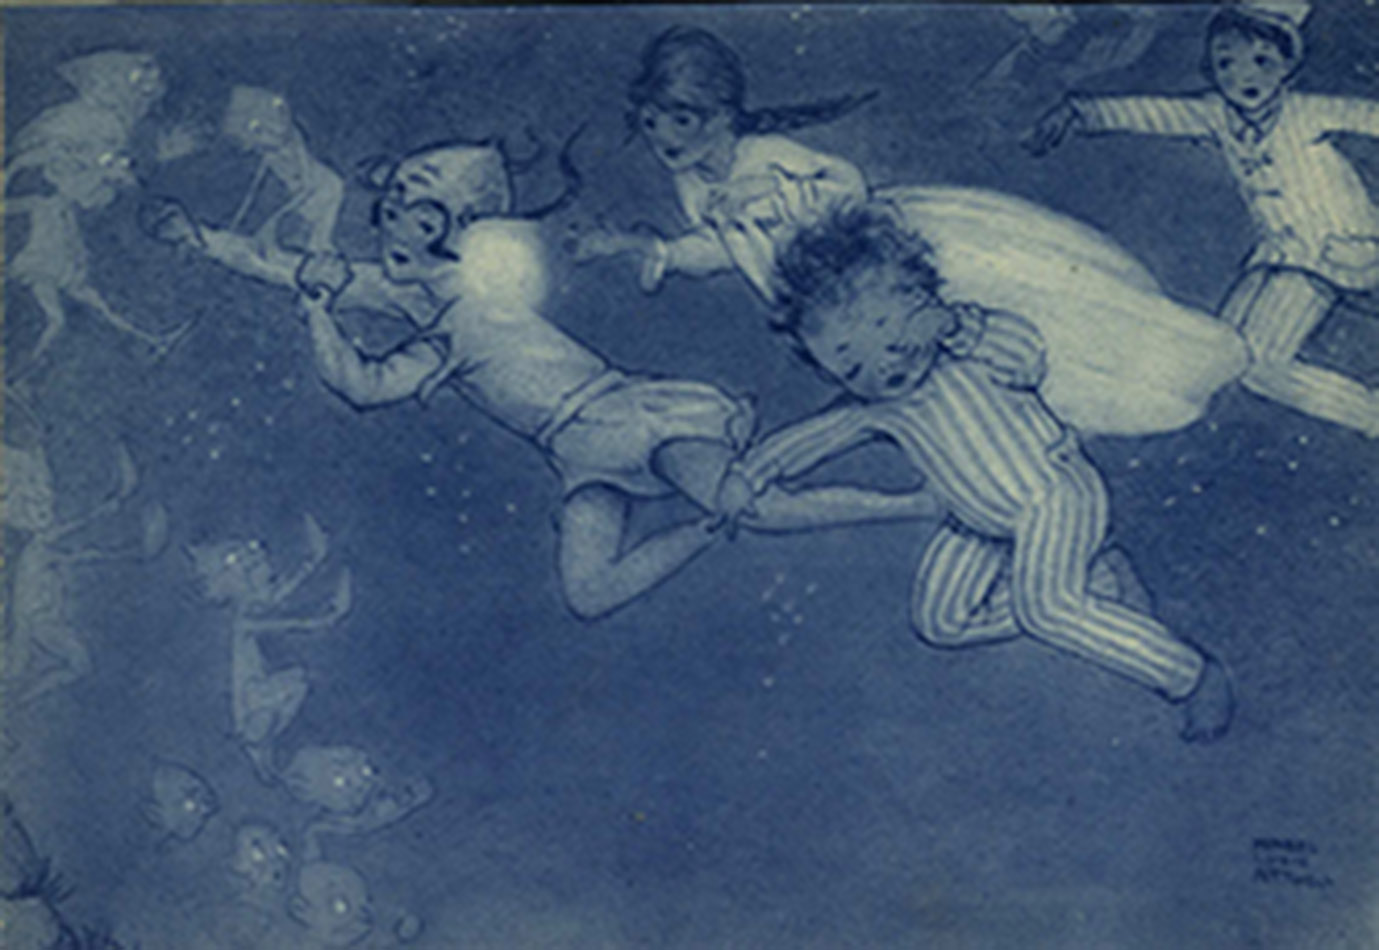 Flying to Neverland, illustration by Mabel Lucie Atwell. Atwell was Barrie’s preferred illustrator of Peter Pan.